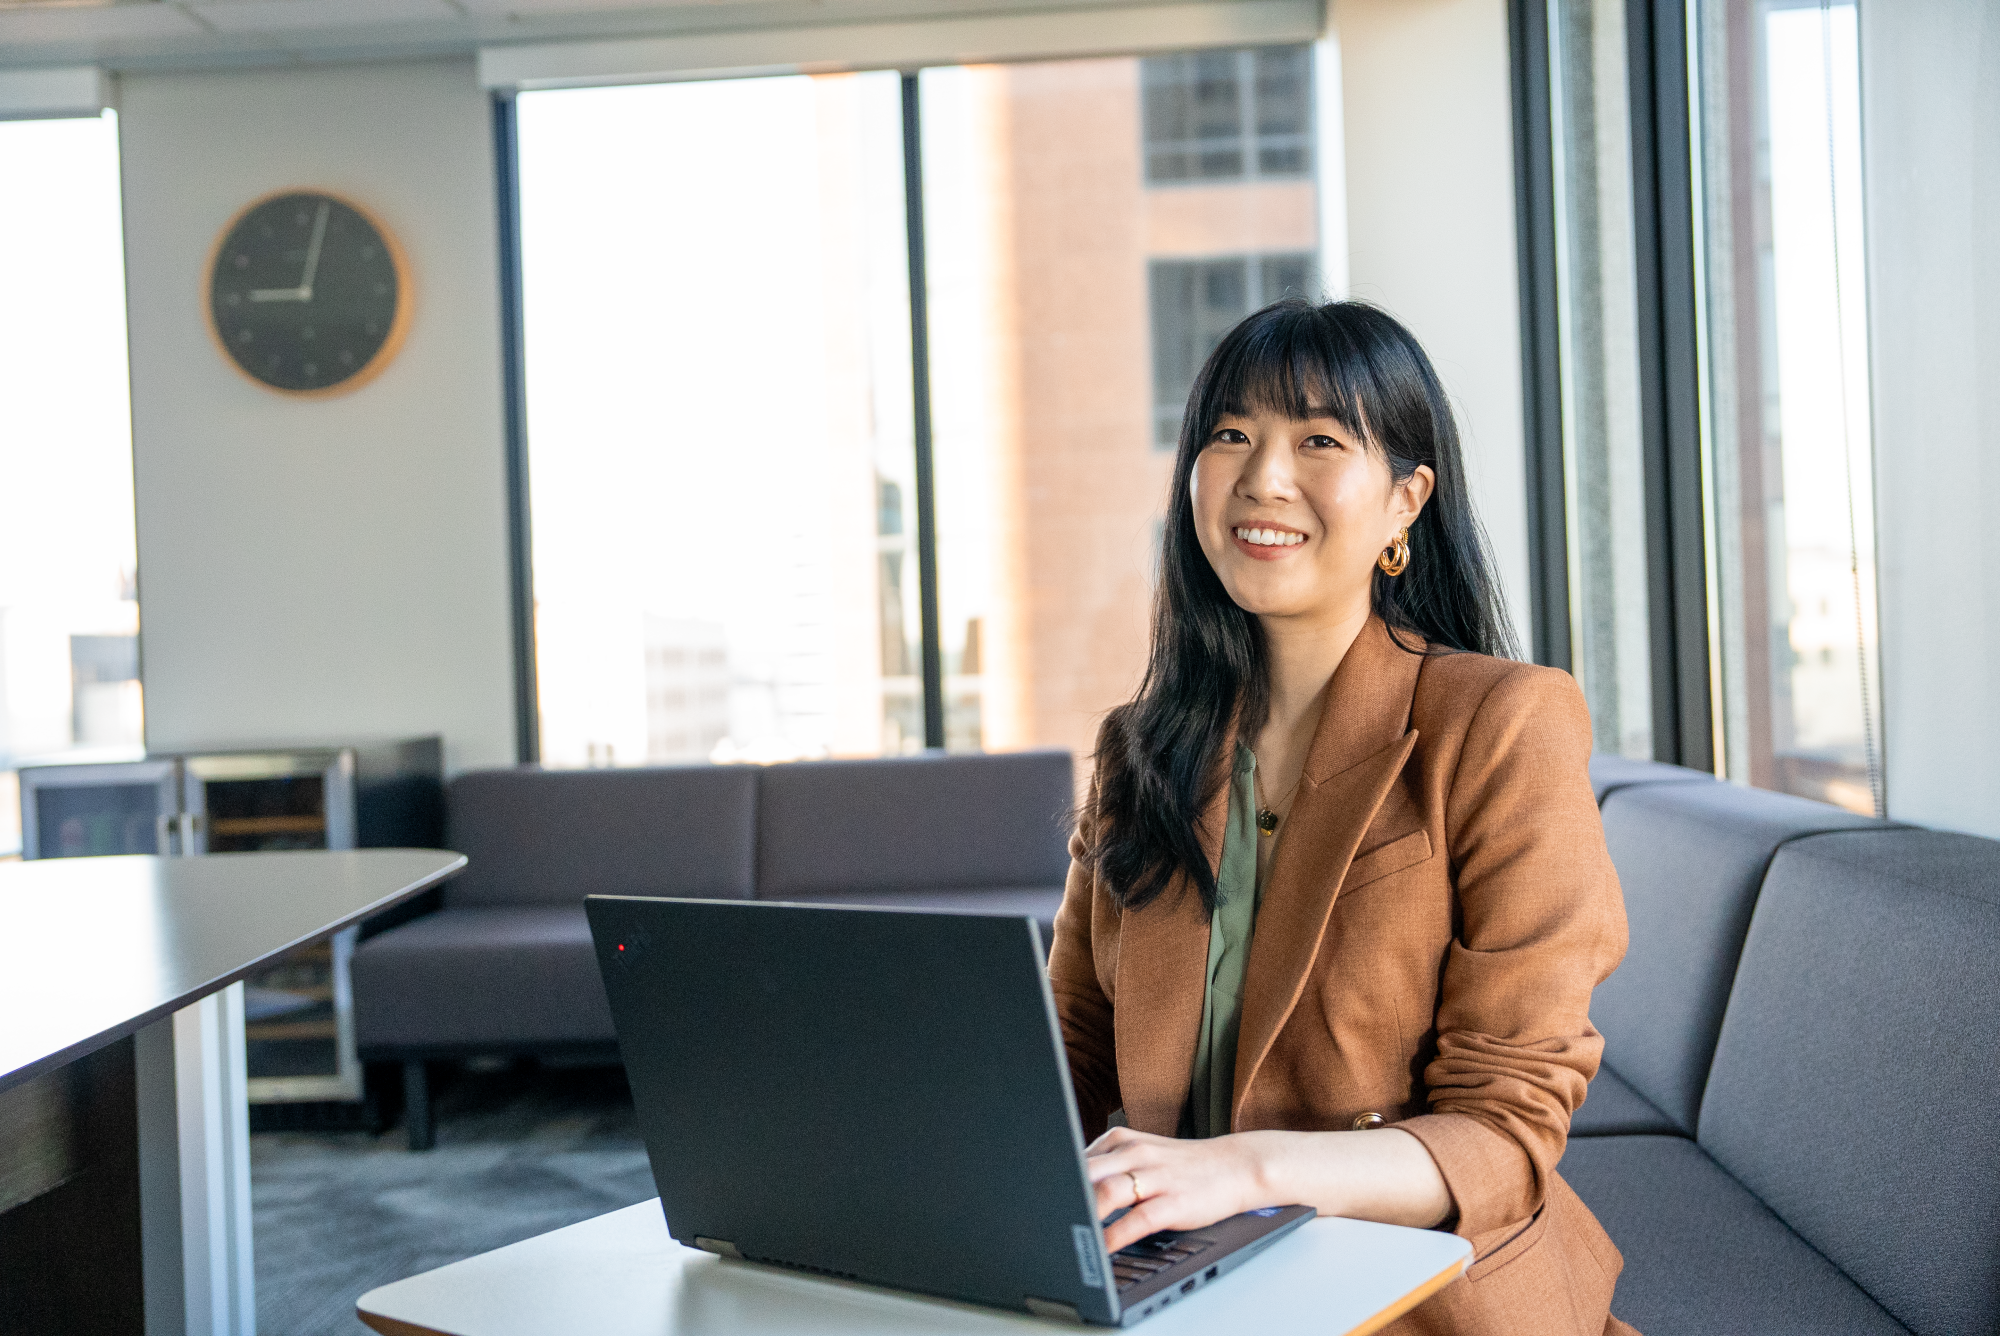 An Asian woman in a brown business coat sitting in front of a laptop.